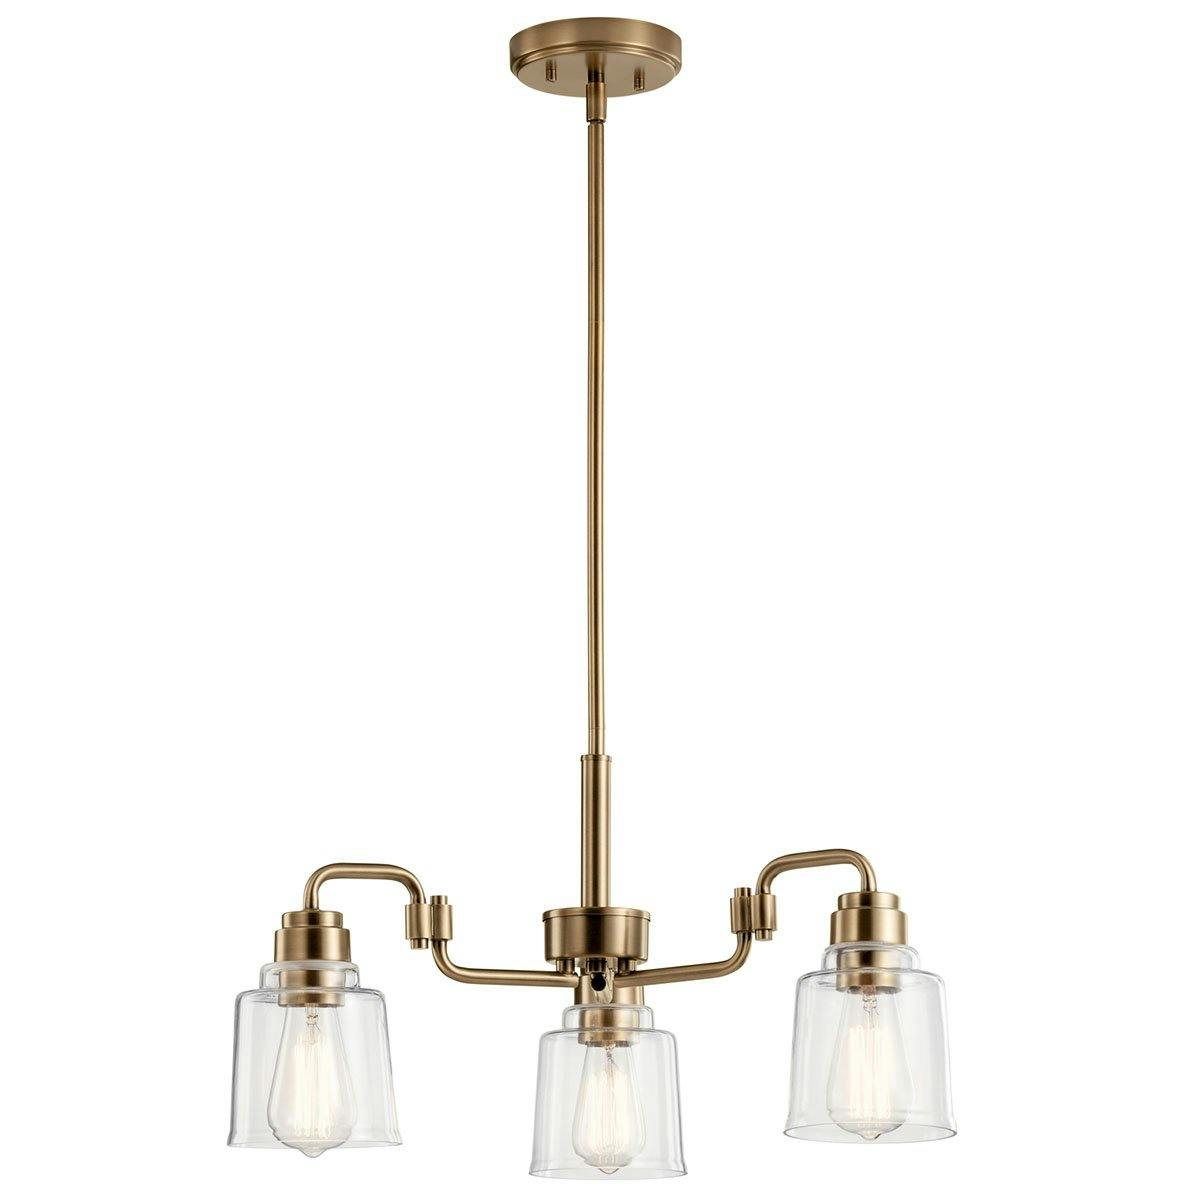 Aivian 23" Chandelier Brass Finish on a white background